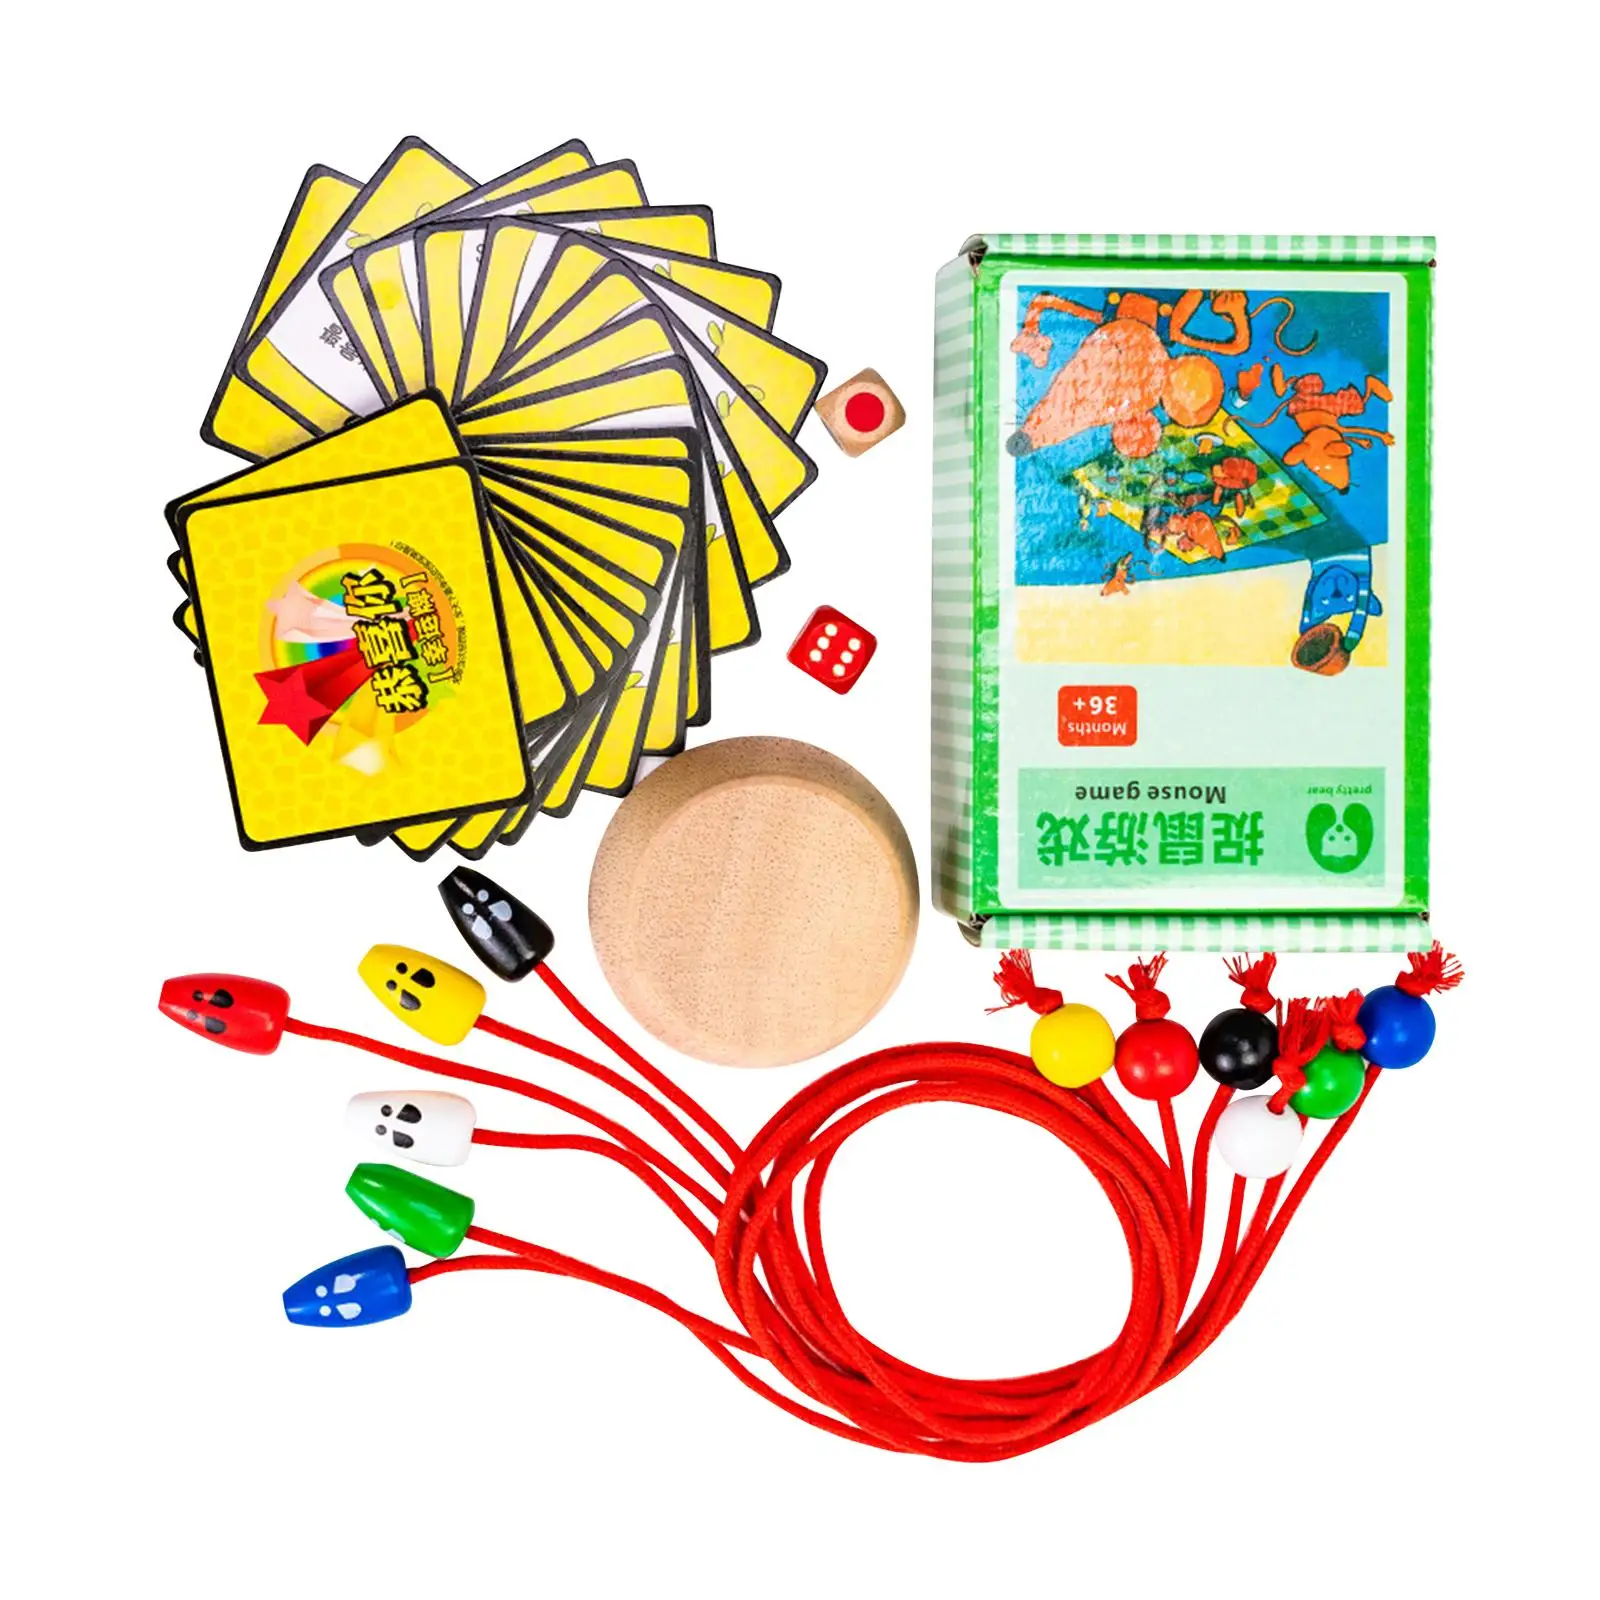 Creative Catcher Mouse Board Game Educational Sensory Learning Toy Interactive Toy Desktop Game for Kids Girls Children Boy